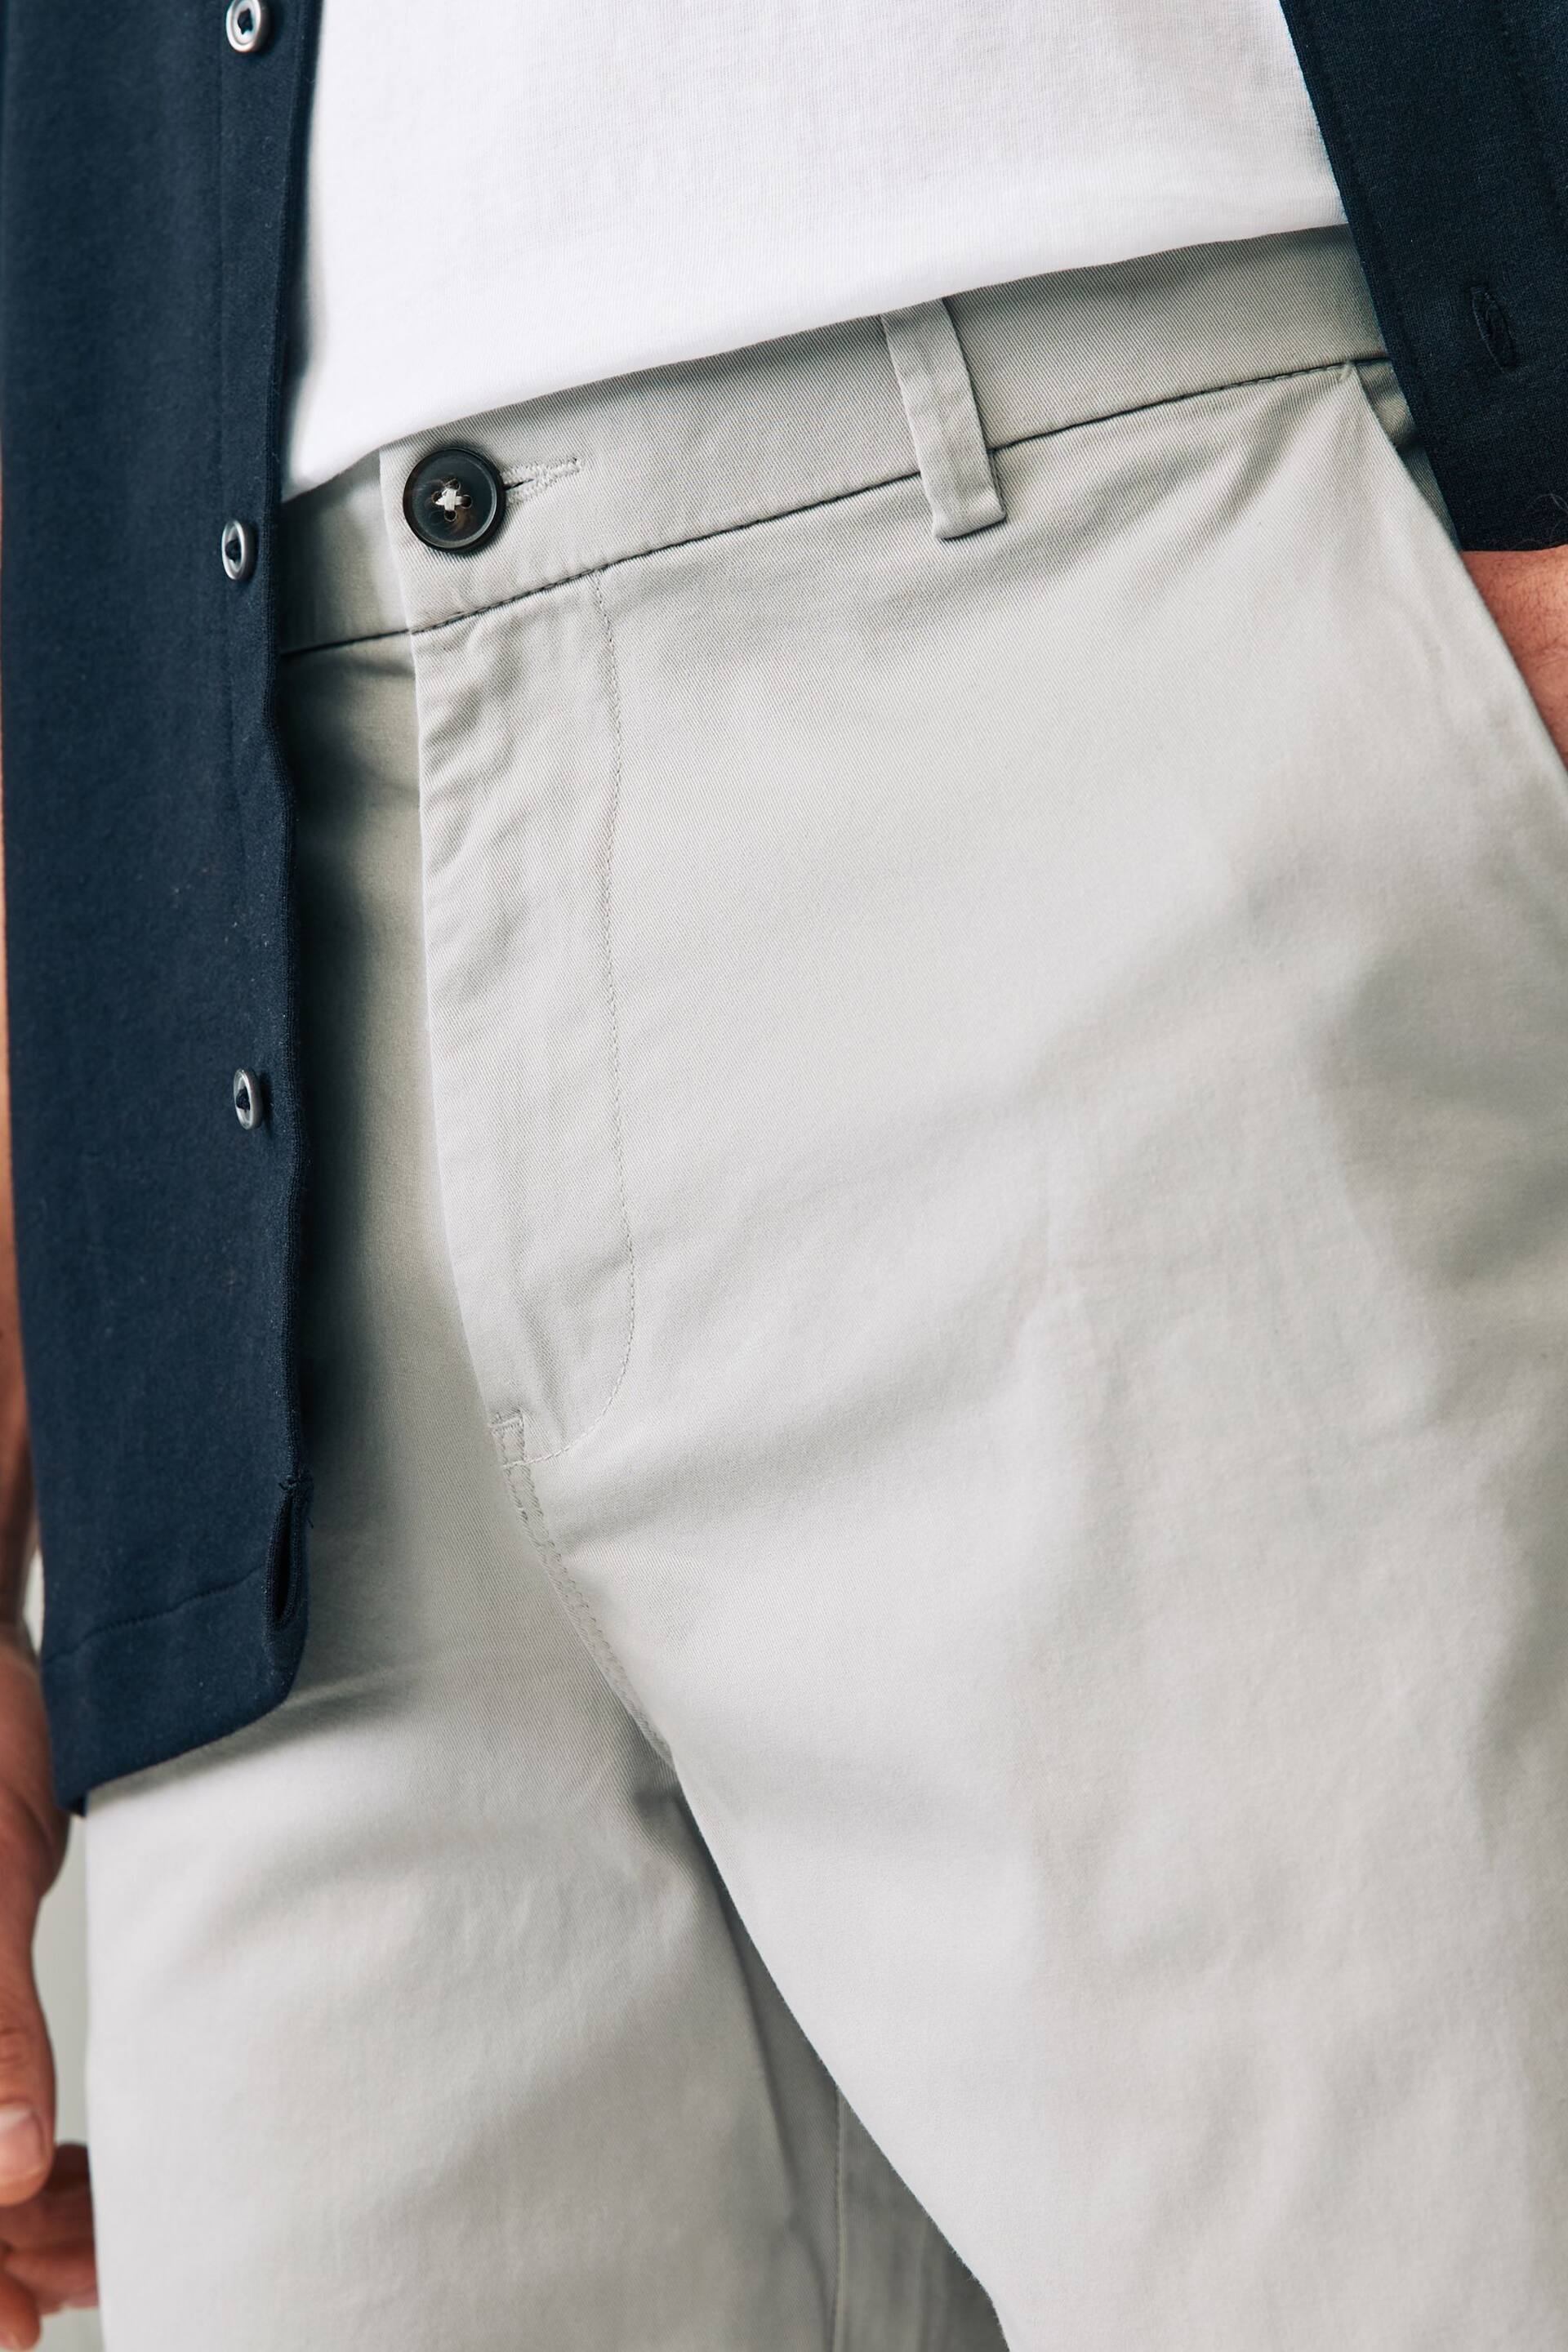 Navy Blue/Grey/Stone Loose Stretch Chinos Shorts 3 Pack - Image 5 of 15